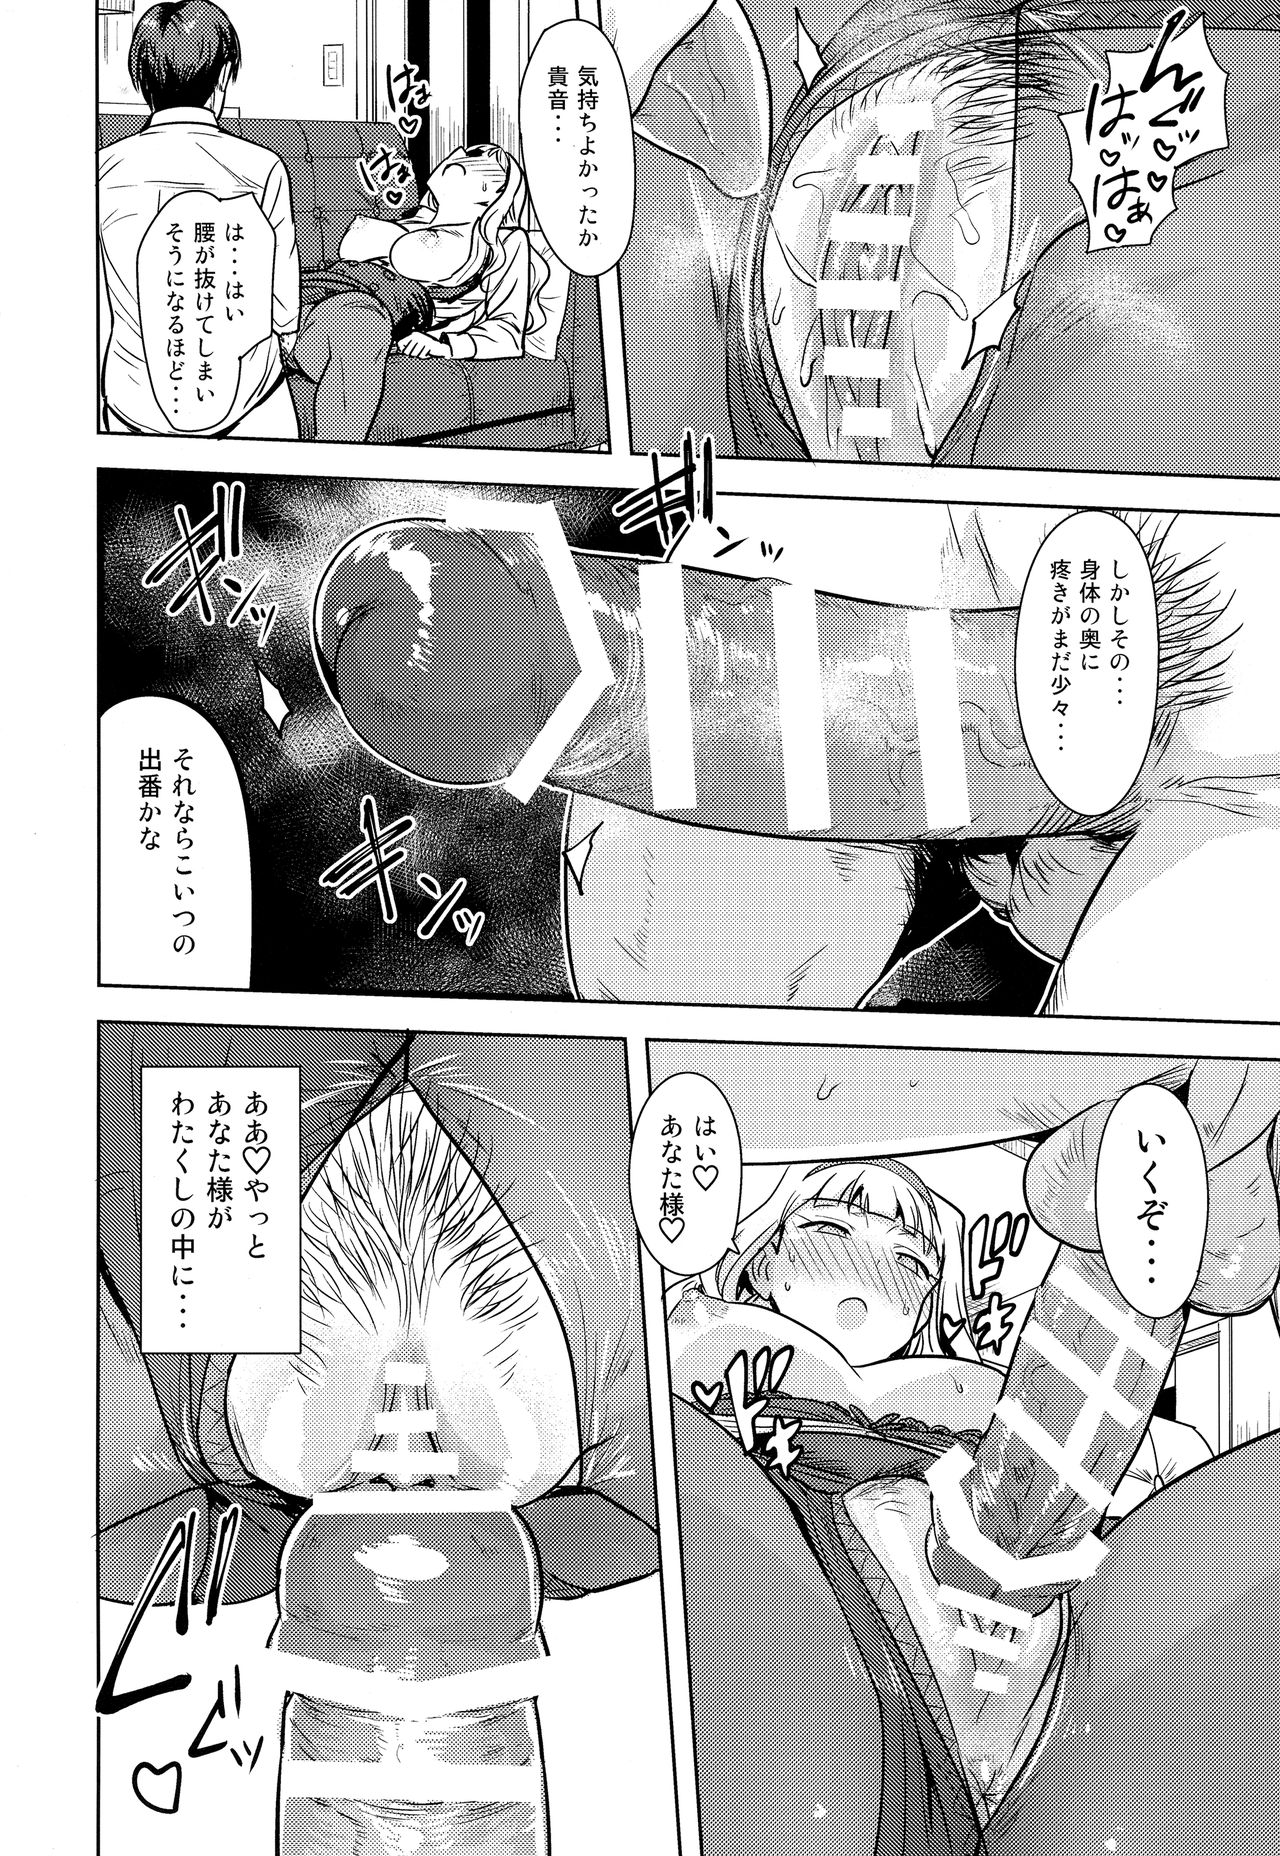 [PLANT (Tsurui)] SWEET MOON 2 (THE IDOLM@STER) page 25 full